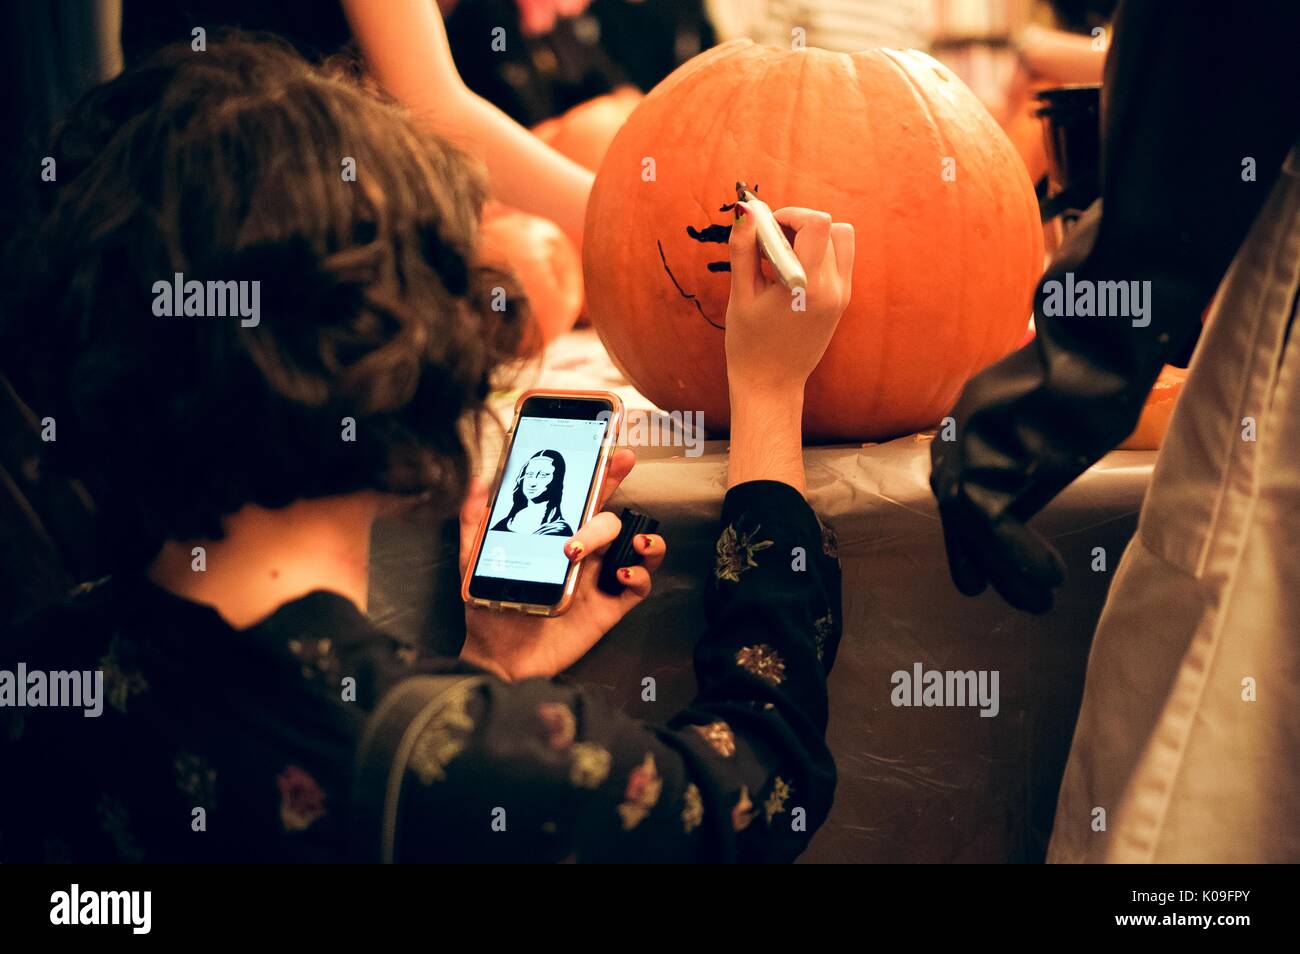 A college student is concentrating on drawing the Mona Lisa on her pumpkin as she holds an image of it on her phone in front of her, 2015. Courtesy Eric Chen. Stock Photo